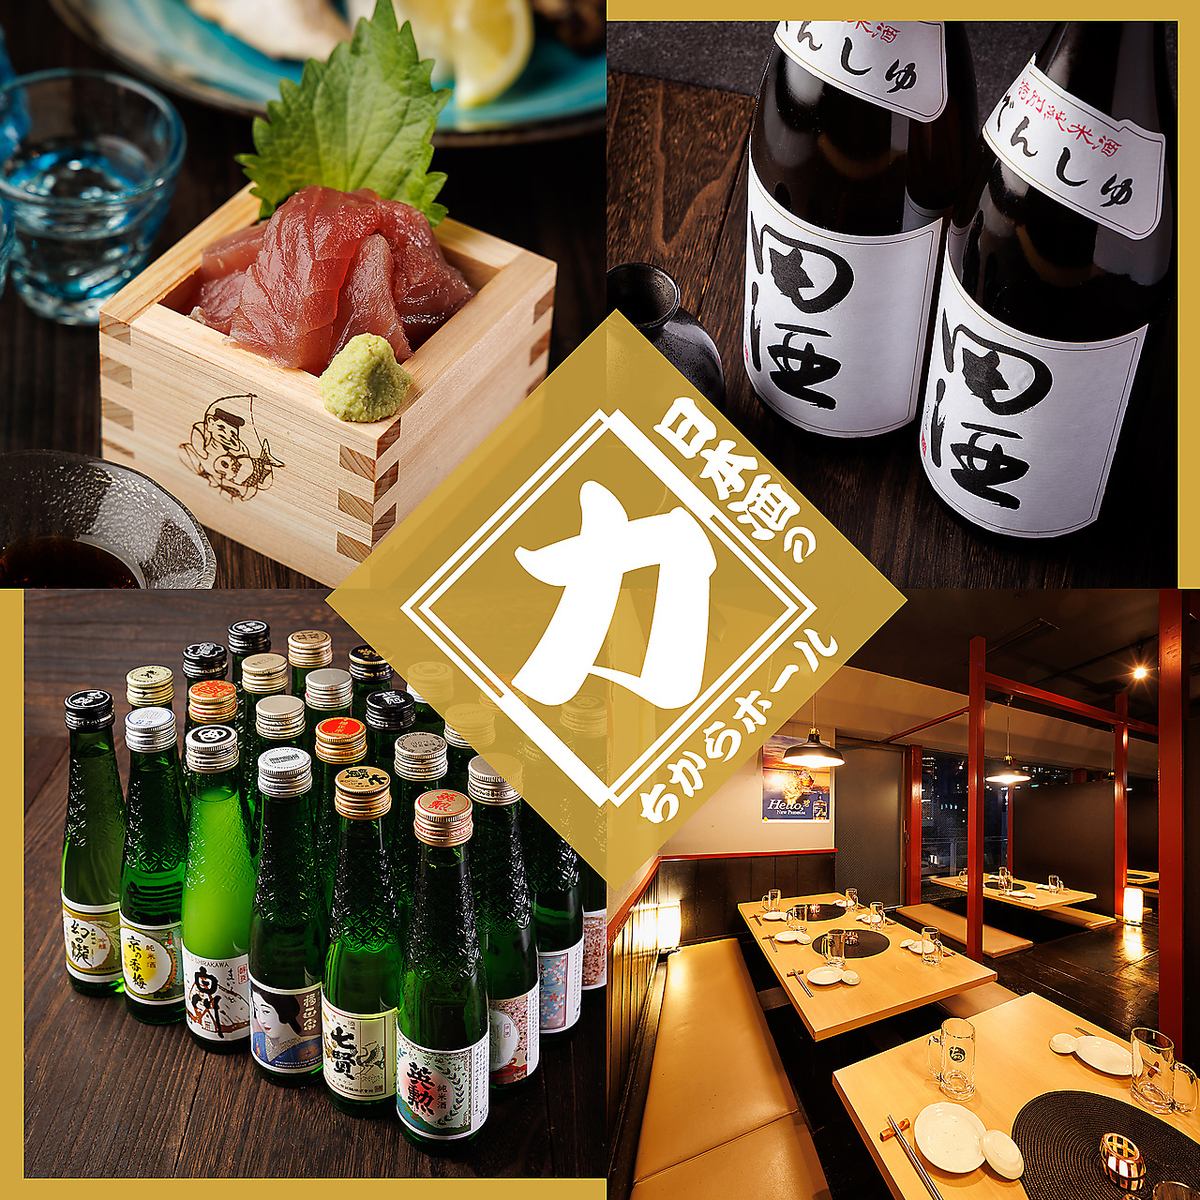 We also have all-you-can-drink items! Please order your favorite dishes♪